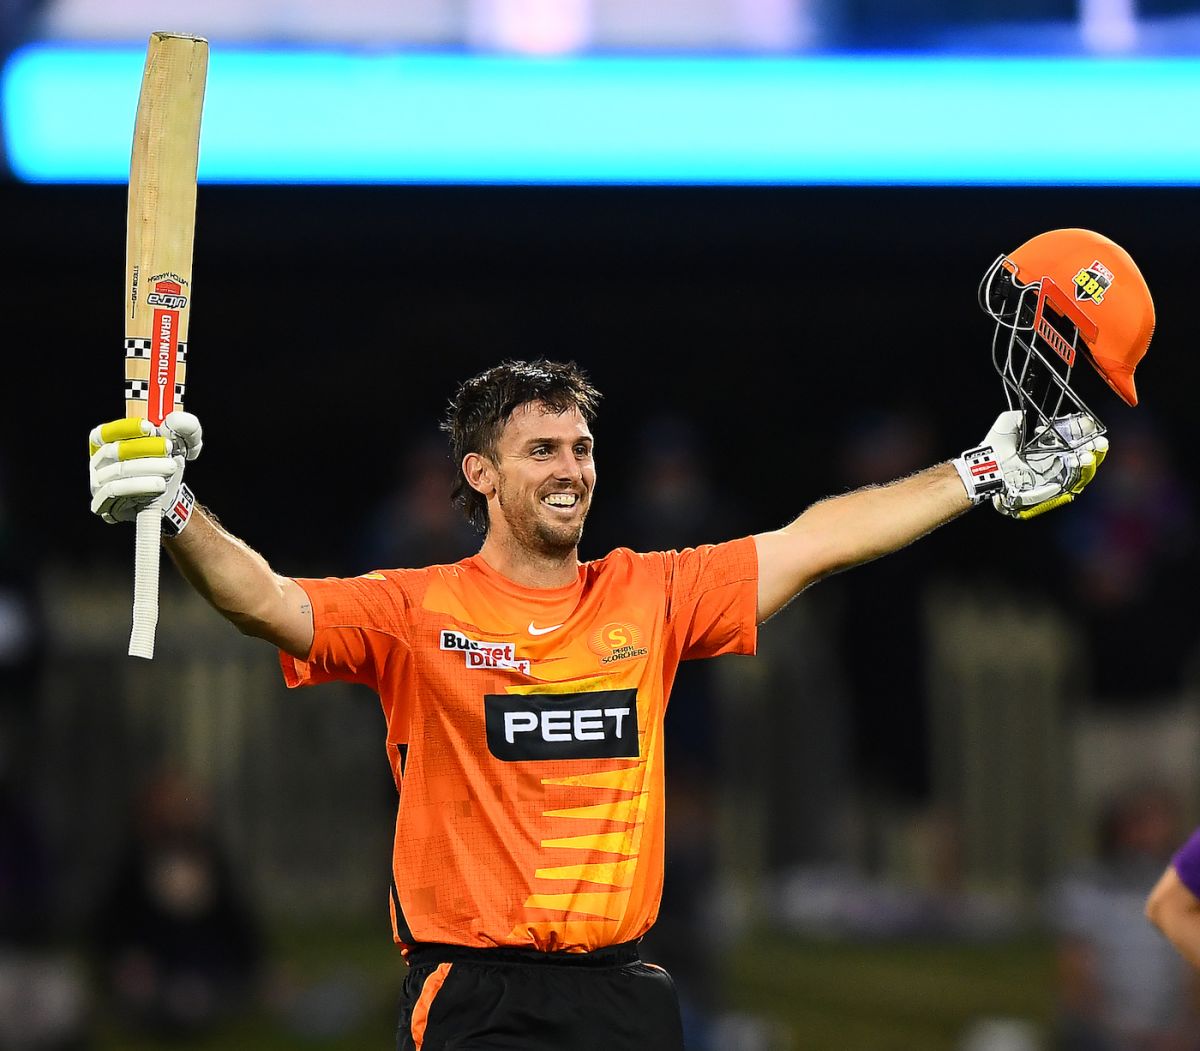 BBL Final LIVE: From Mitch Marsh to Hayden Kerr, 5 players to watch out in Big Bash League Final - Check out